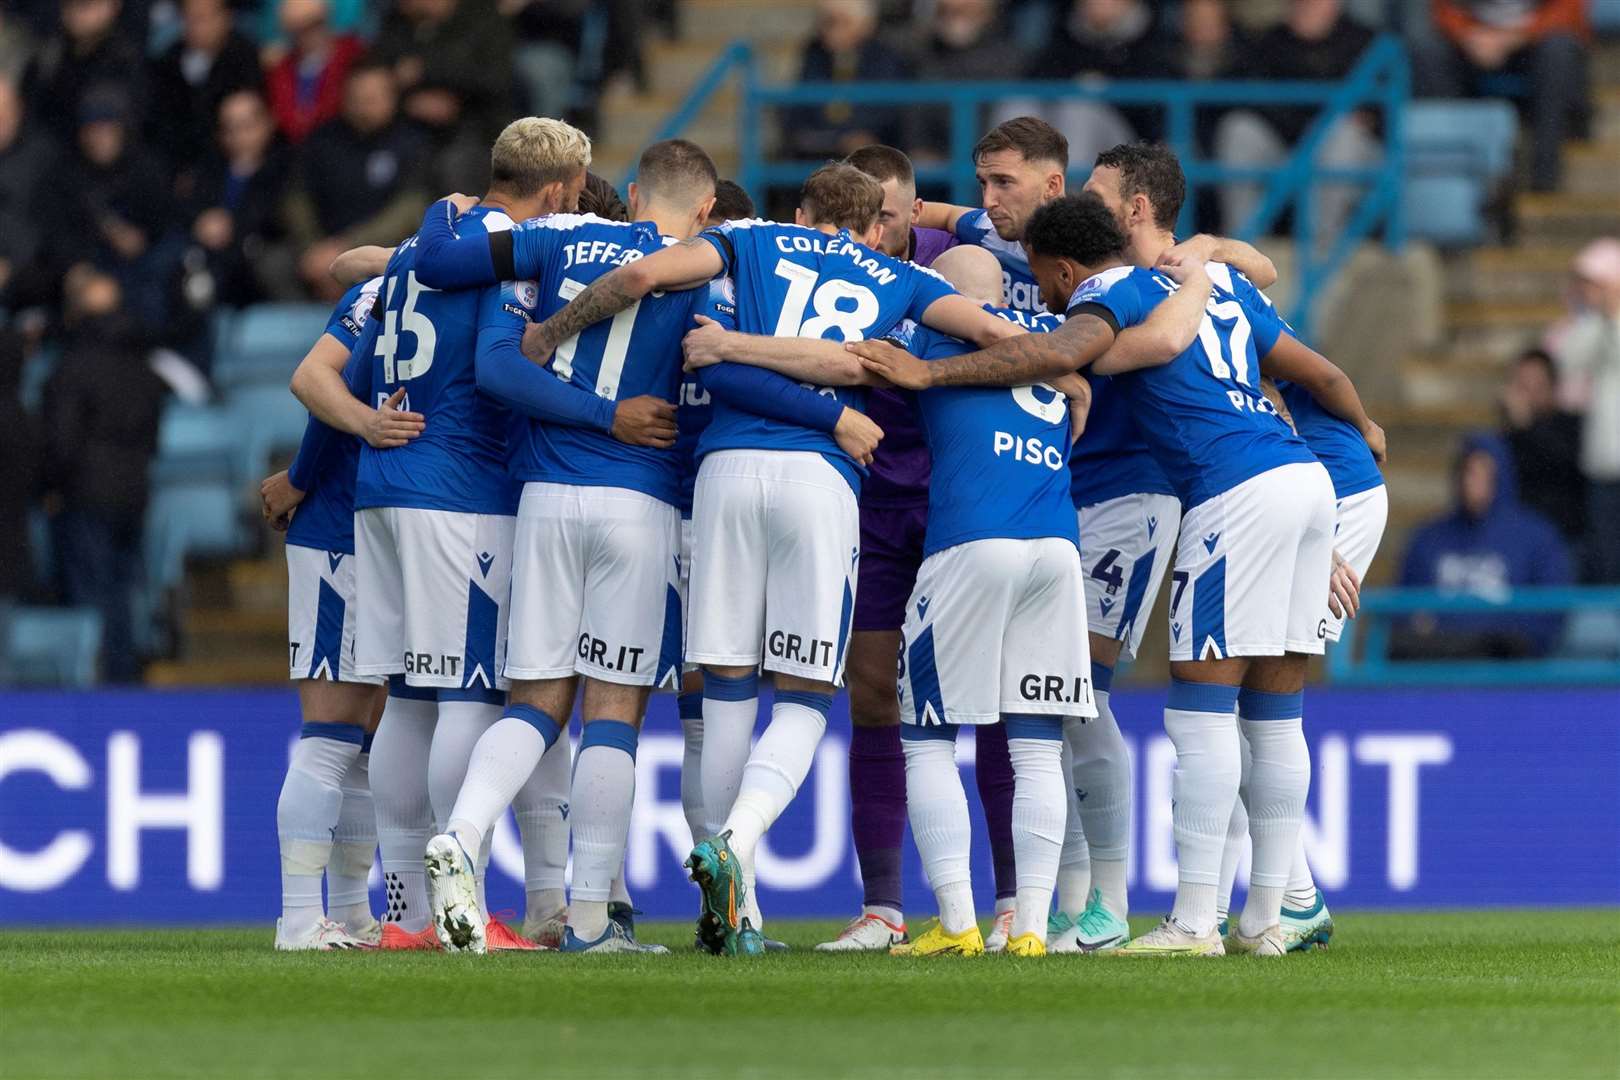 Gillingham players get together before last weekend’s game against Notts County Picture: @Julian_KPI